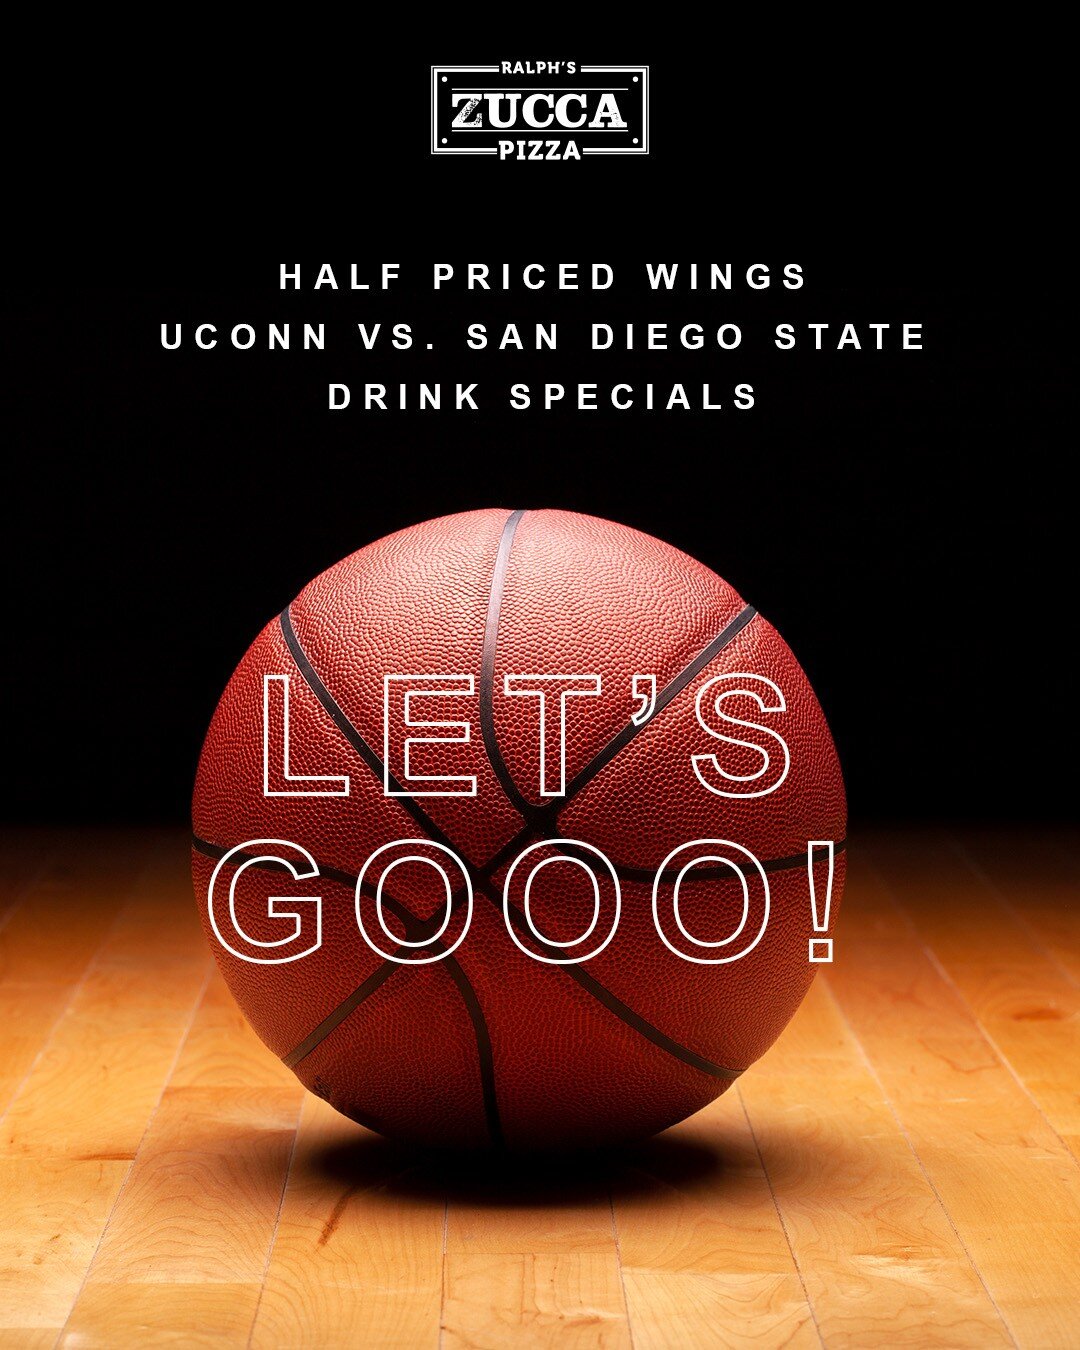 This Monday is a slam dunk 😉

🔥 Half priced wings all day (*dine-in only)

🏀 UConn vs San Diego State - 9:20

🍹 $4 house margaritas, $3 Fireball, $4 Jager, and $2.5 Domestic bottles